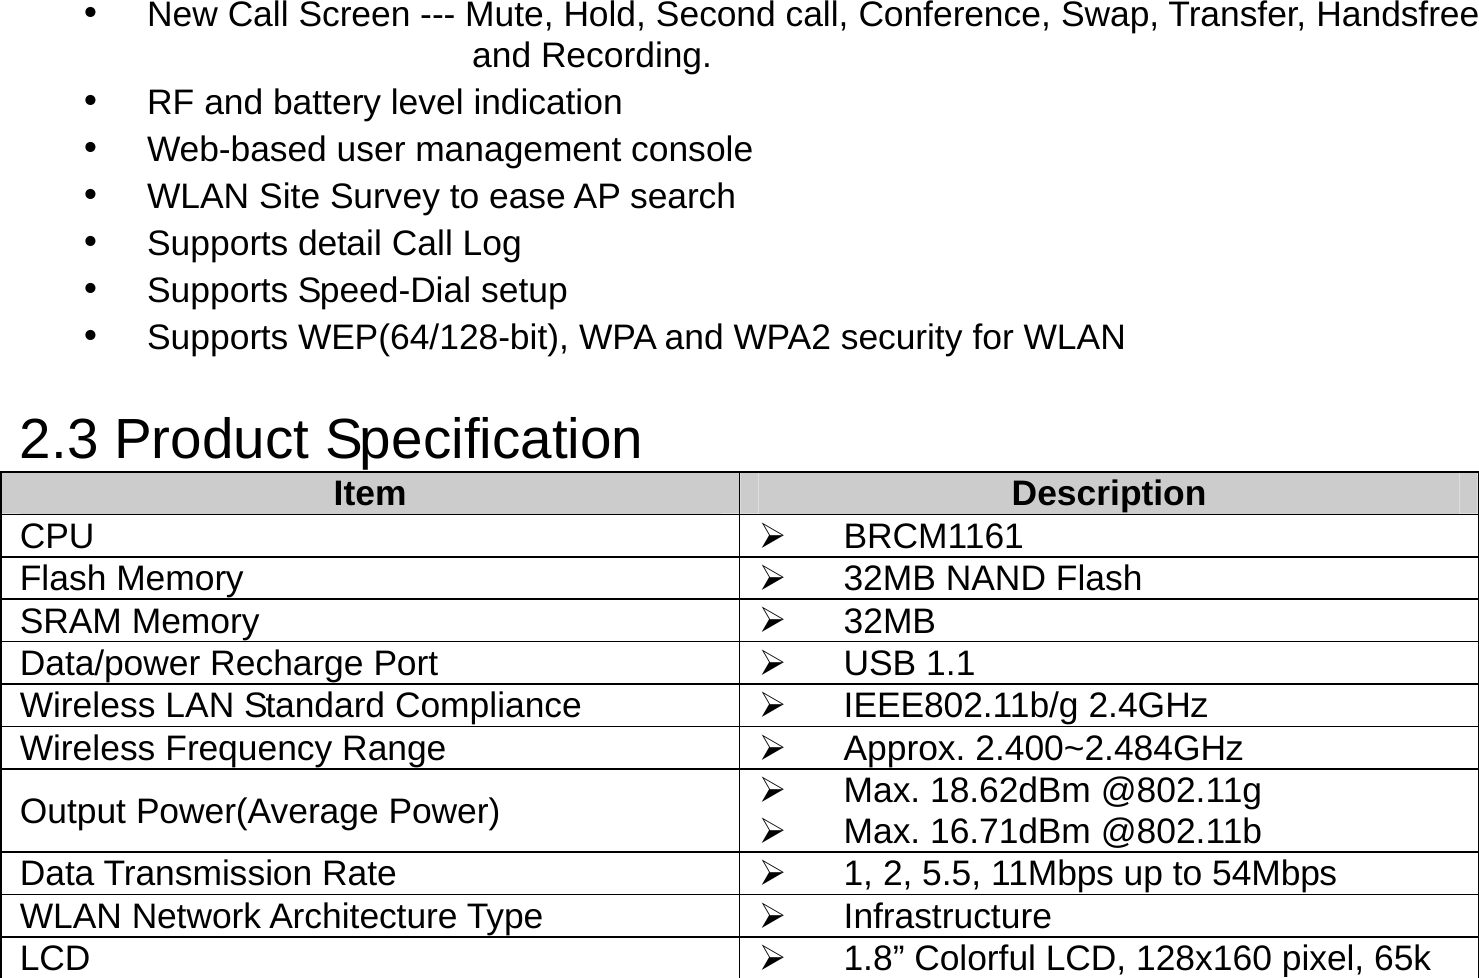 •  New Call Screen --- Mute, Hold, Second call, Conference, Swap, Transfer, Handsfree   and Recording. •  RF and battery level indication •  Web-based user management console •  WLAN Site Survey to ease AP search •  Supports detail Call Log •  Supports Speed-Dial setup •  Supports WEP(64/128-bit), WPA and WPA2 security for WLAN  2.3 Product Specification Item  Description CPU    BRCM1161 Flash Memory    32MB NAND Flash SRAM Memory    32MB Data/power Recharge Port    USB 1.1 Wireless LAN Standard Compliance    IEEE802.11b/g 2.4GHz   Wireless Frequency Range    Approx. 2.400~2.484GHz Output Power(Average Power)    Max. 18.62dBm @802.11g   Max. 16.71dBm @802.11b Data Transmission Rate    1, 2, 5.5, 11Mbps up to 54Mbps WLAN Network Architecture Type    Infrastructure LCD    1.8” Colorful LCD, 128x160 pixel, 65k 